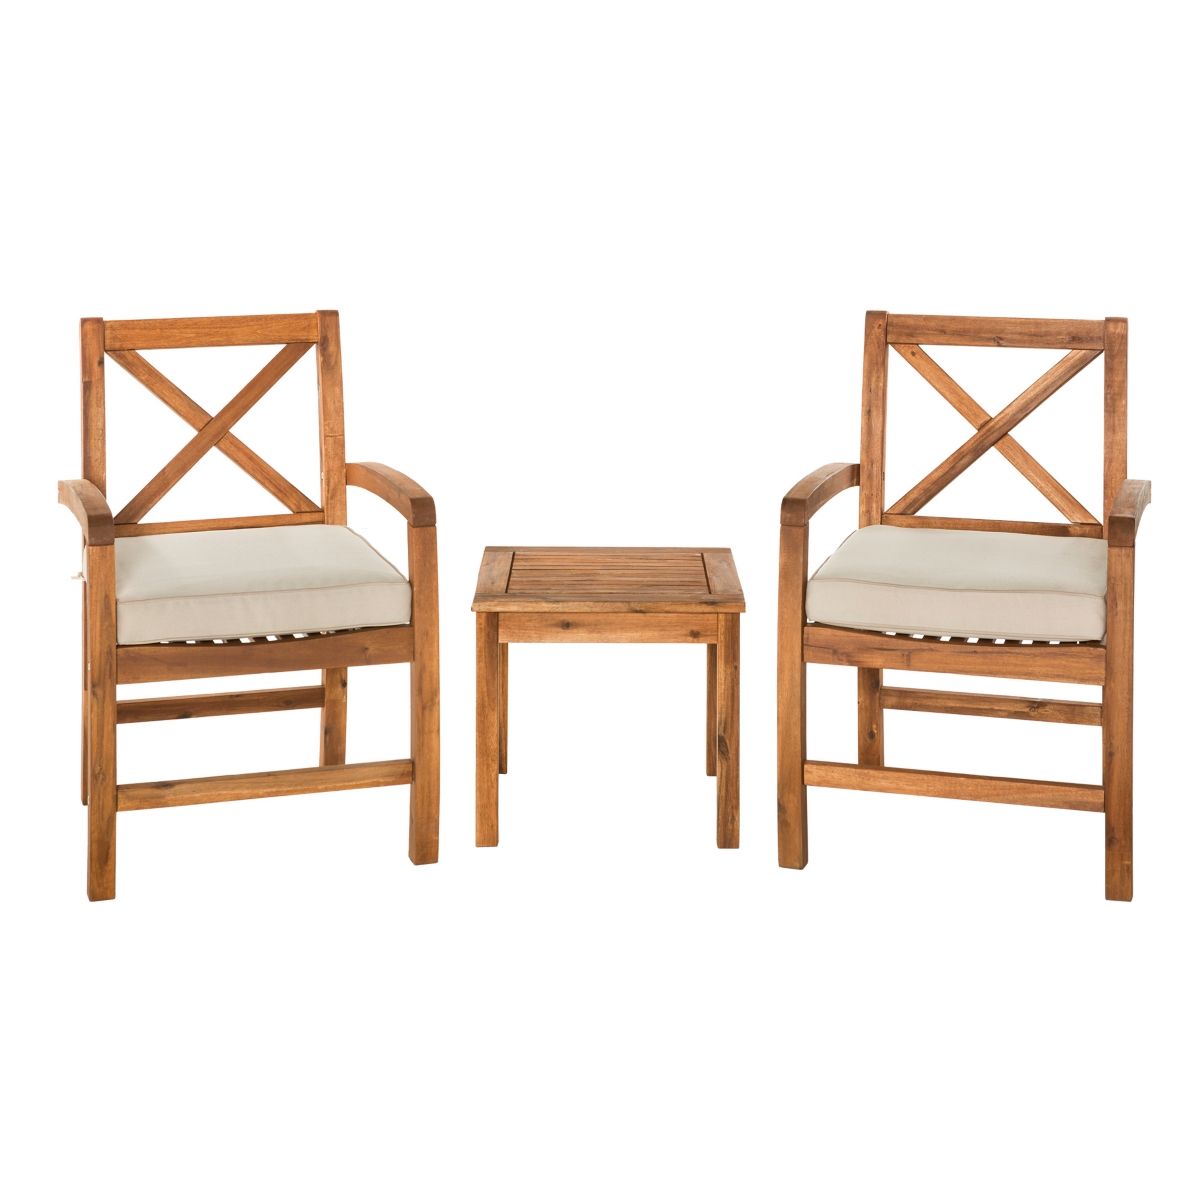 Acacia Wood Patio Chairs with X-Design and Side Table - Brown | Macys (US)